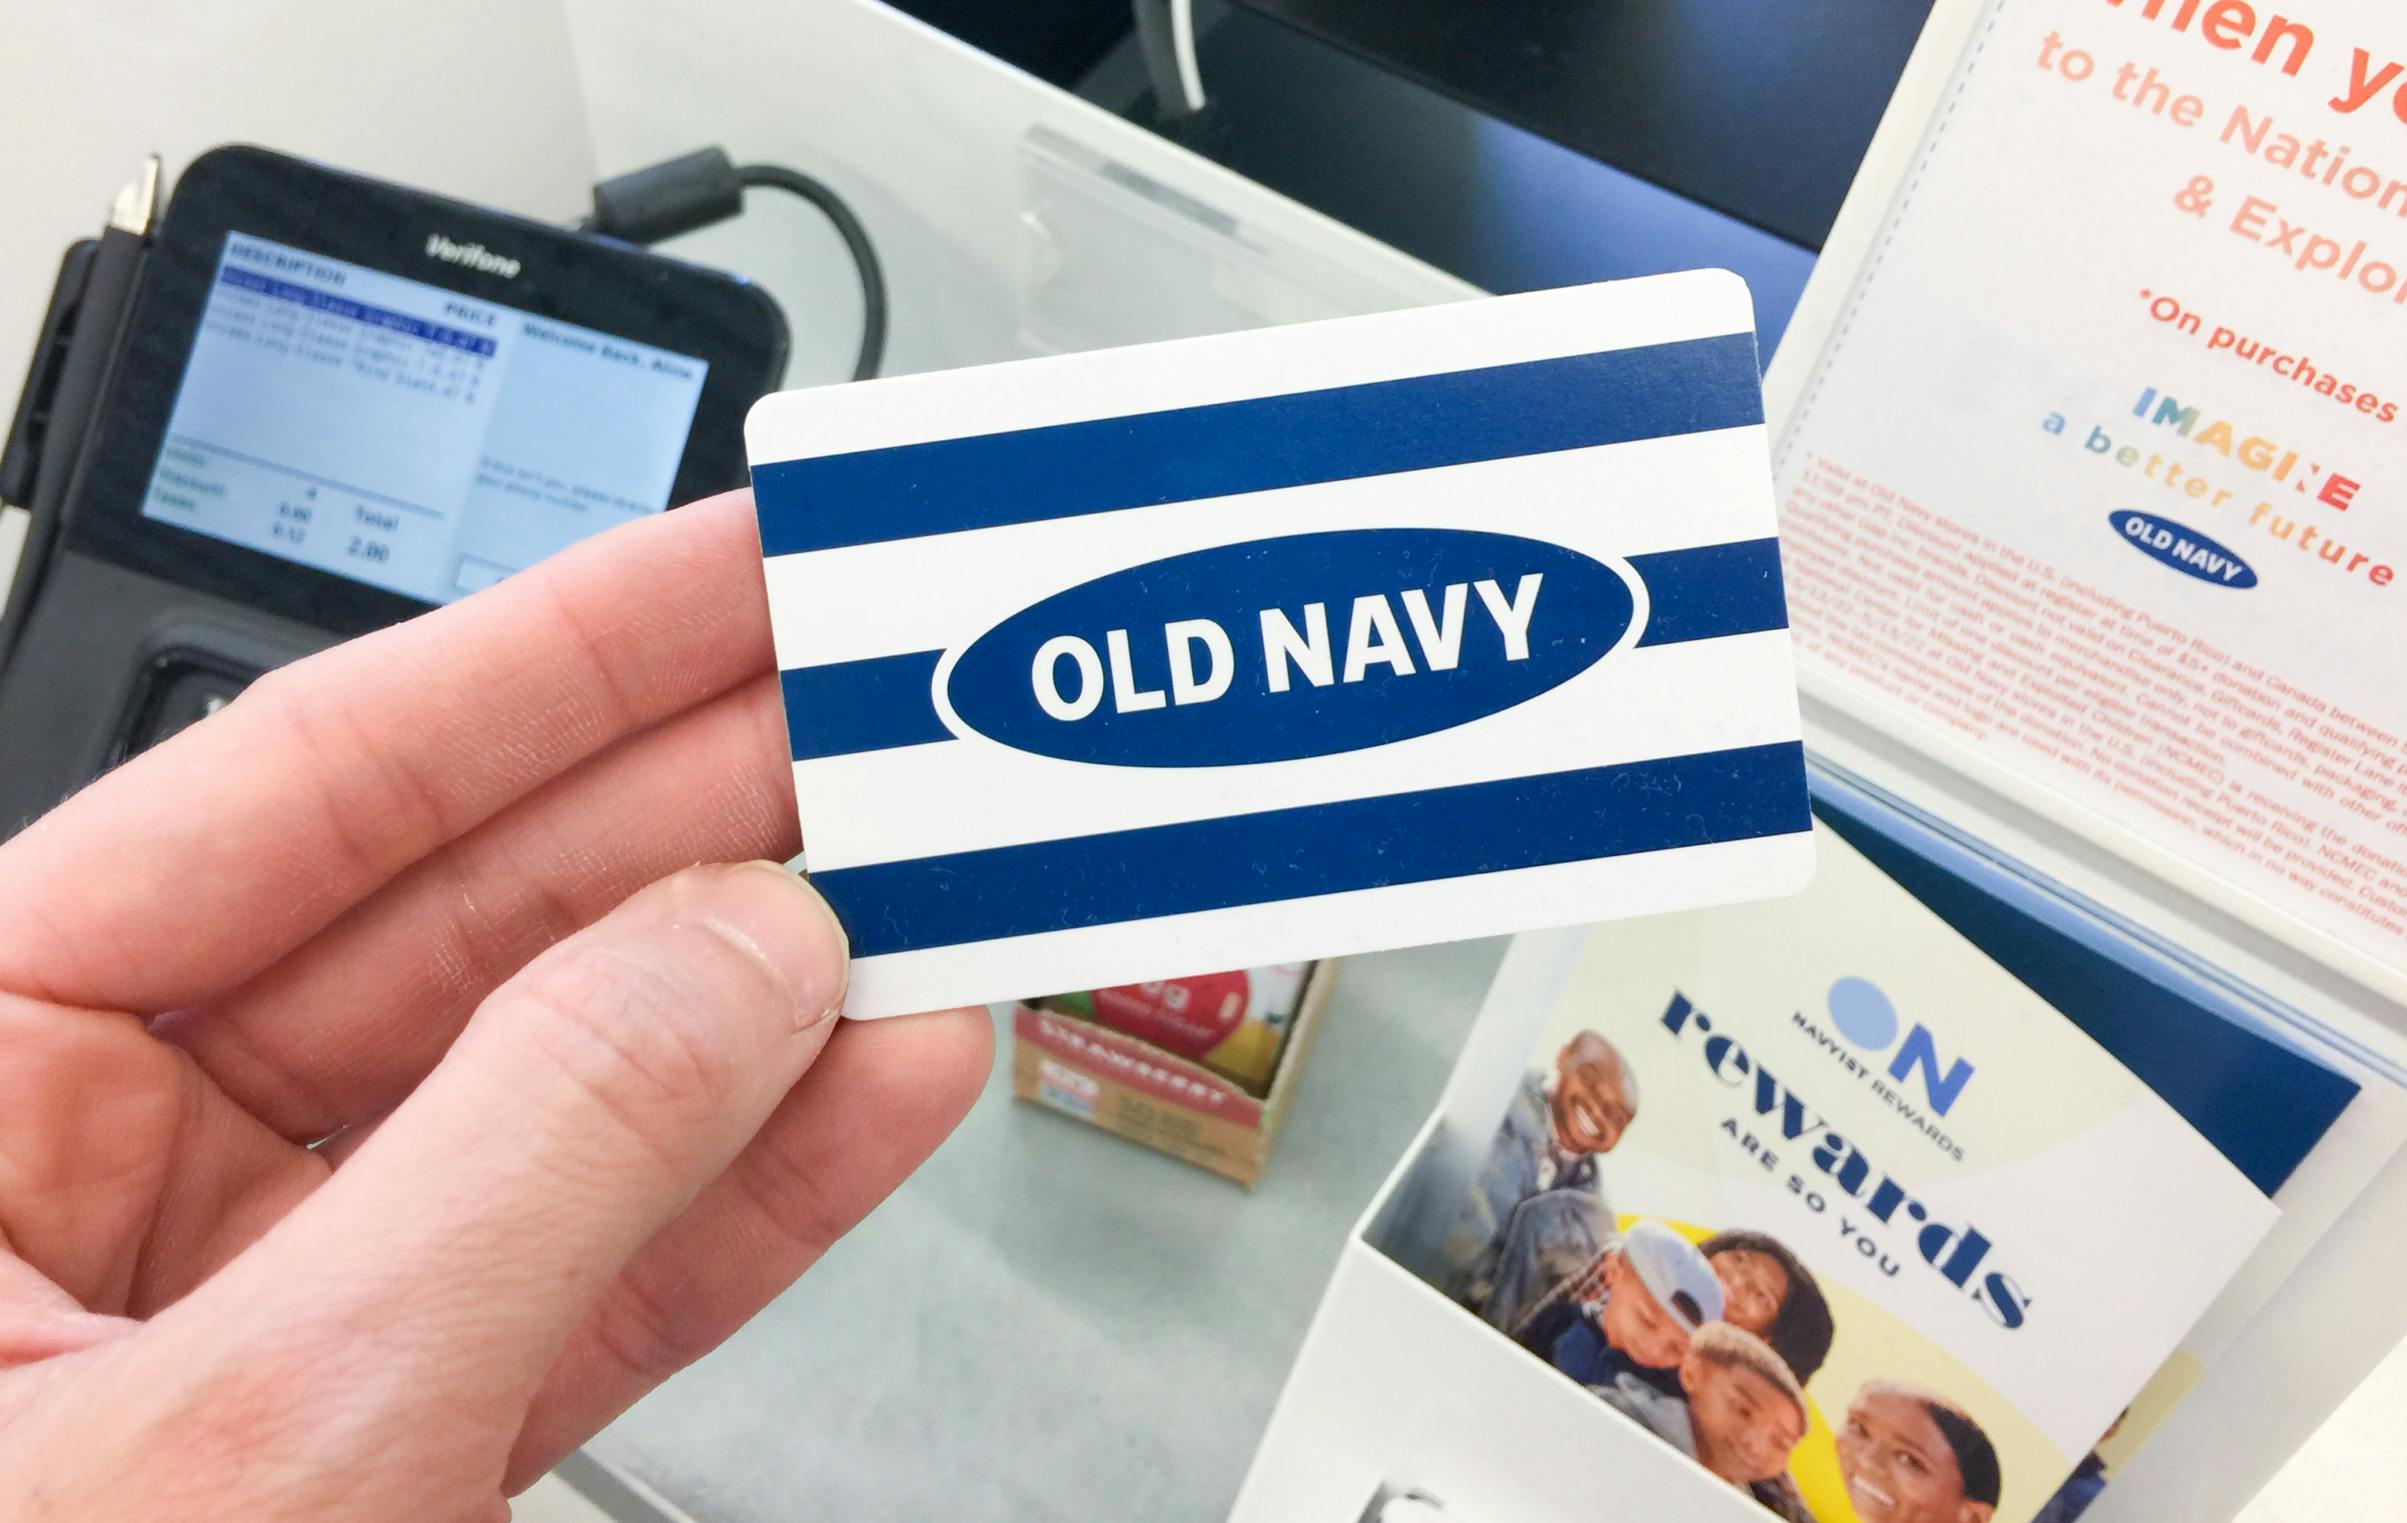 A person's hand holding an Old Navy gift card in front of the checkout counter inside Old Navy.